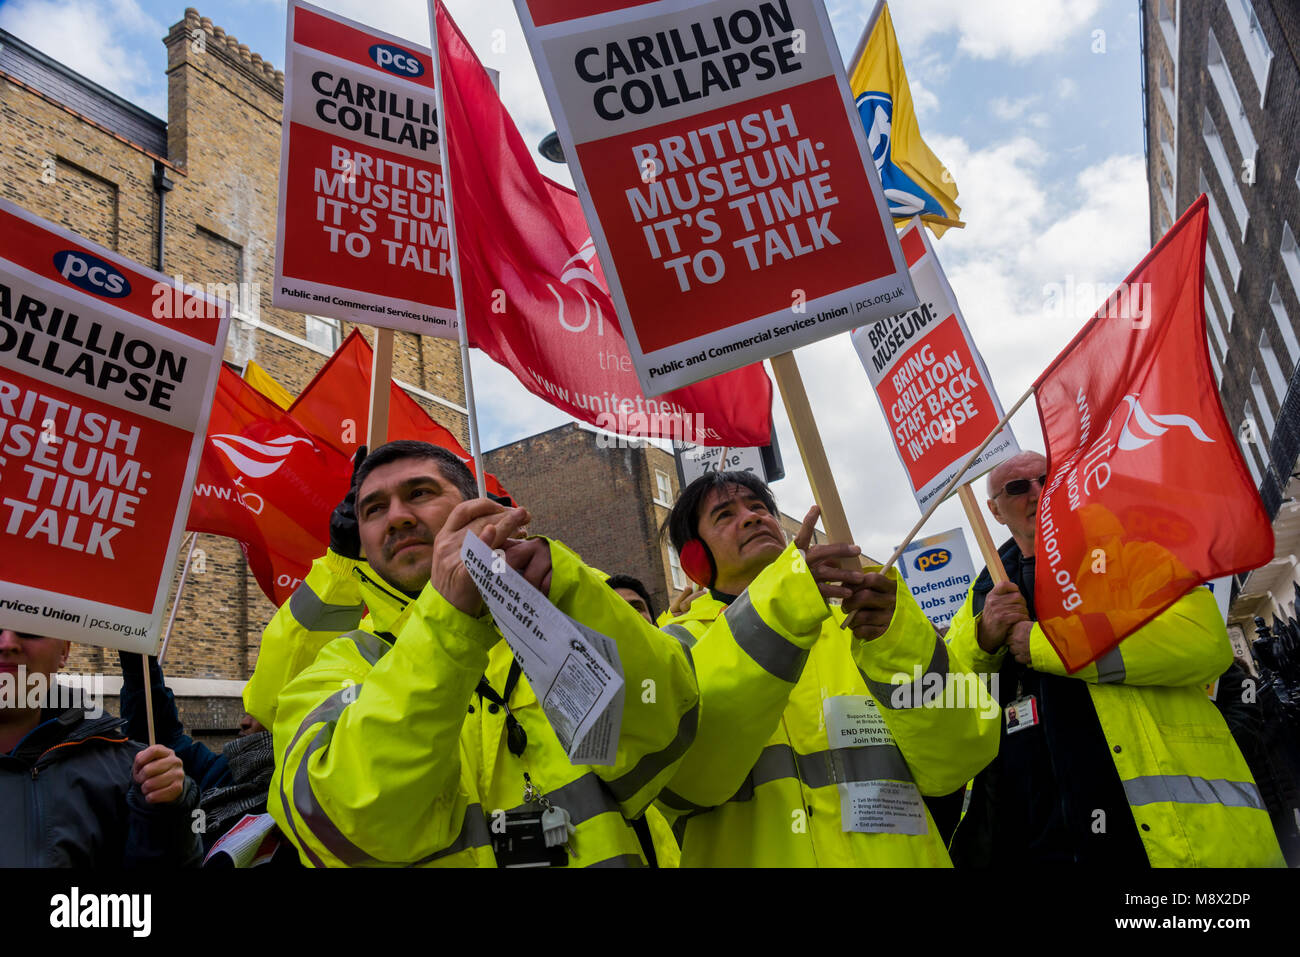 London, UK. 20th Mar, 2018. Ex-Carrilion workers outside the offices of the British Museum management at the protest by staff whose jobs were privatised despite union oppositions and became Carillion employees and have been left in limbo after the collapse of the company. They demand that the British Museum talk with their unions, the PCSm and Unite, bring the staff back into direct employment and protect their jobs, pensions and terms and conditions. Speakers at the protest included PCS General Secretary Mark Serwotka, Clara Paillard, President of PCS Culture Group and Zita Holbourne. Shado Stock Photo